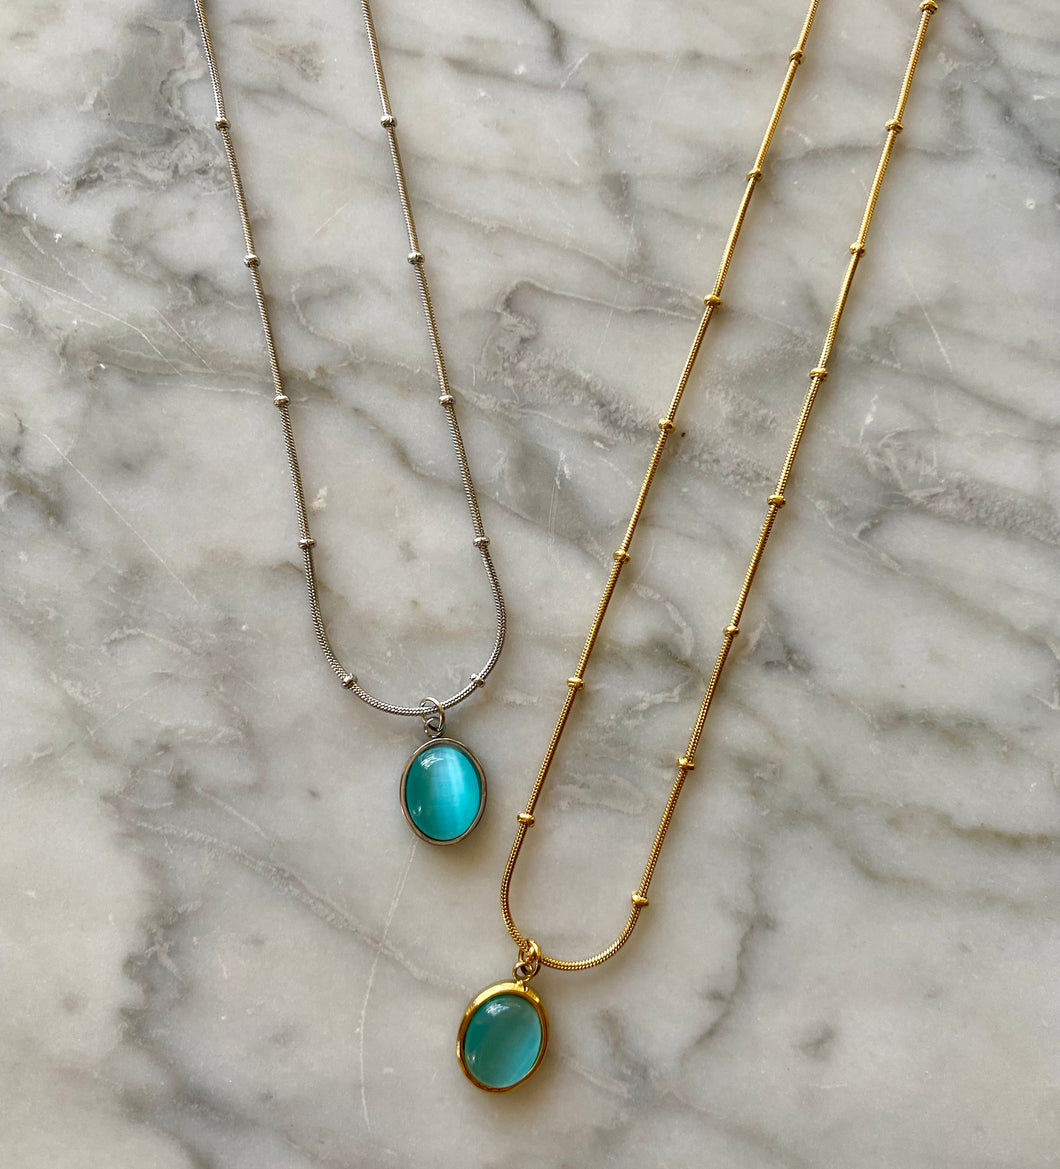 The Turquoise Necklace